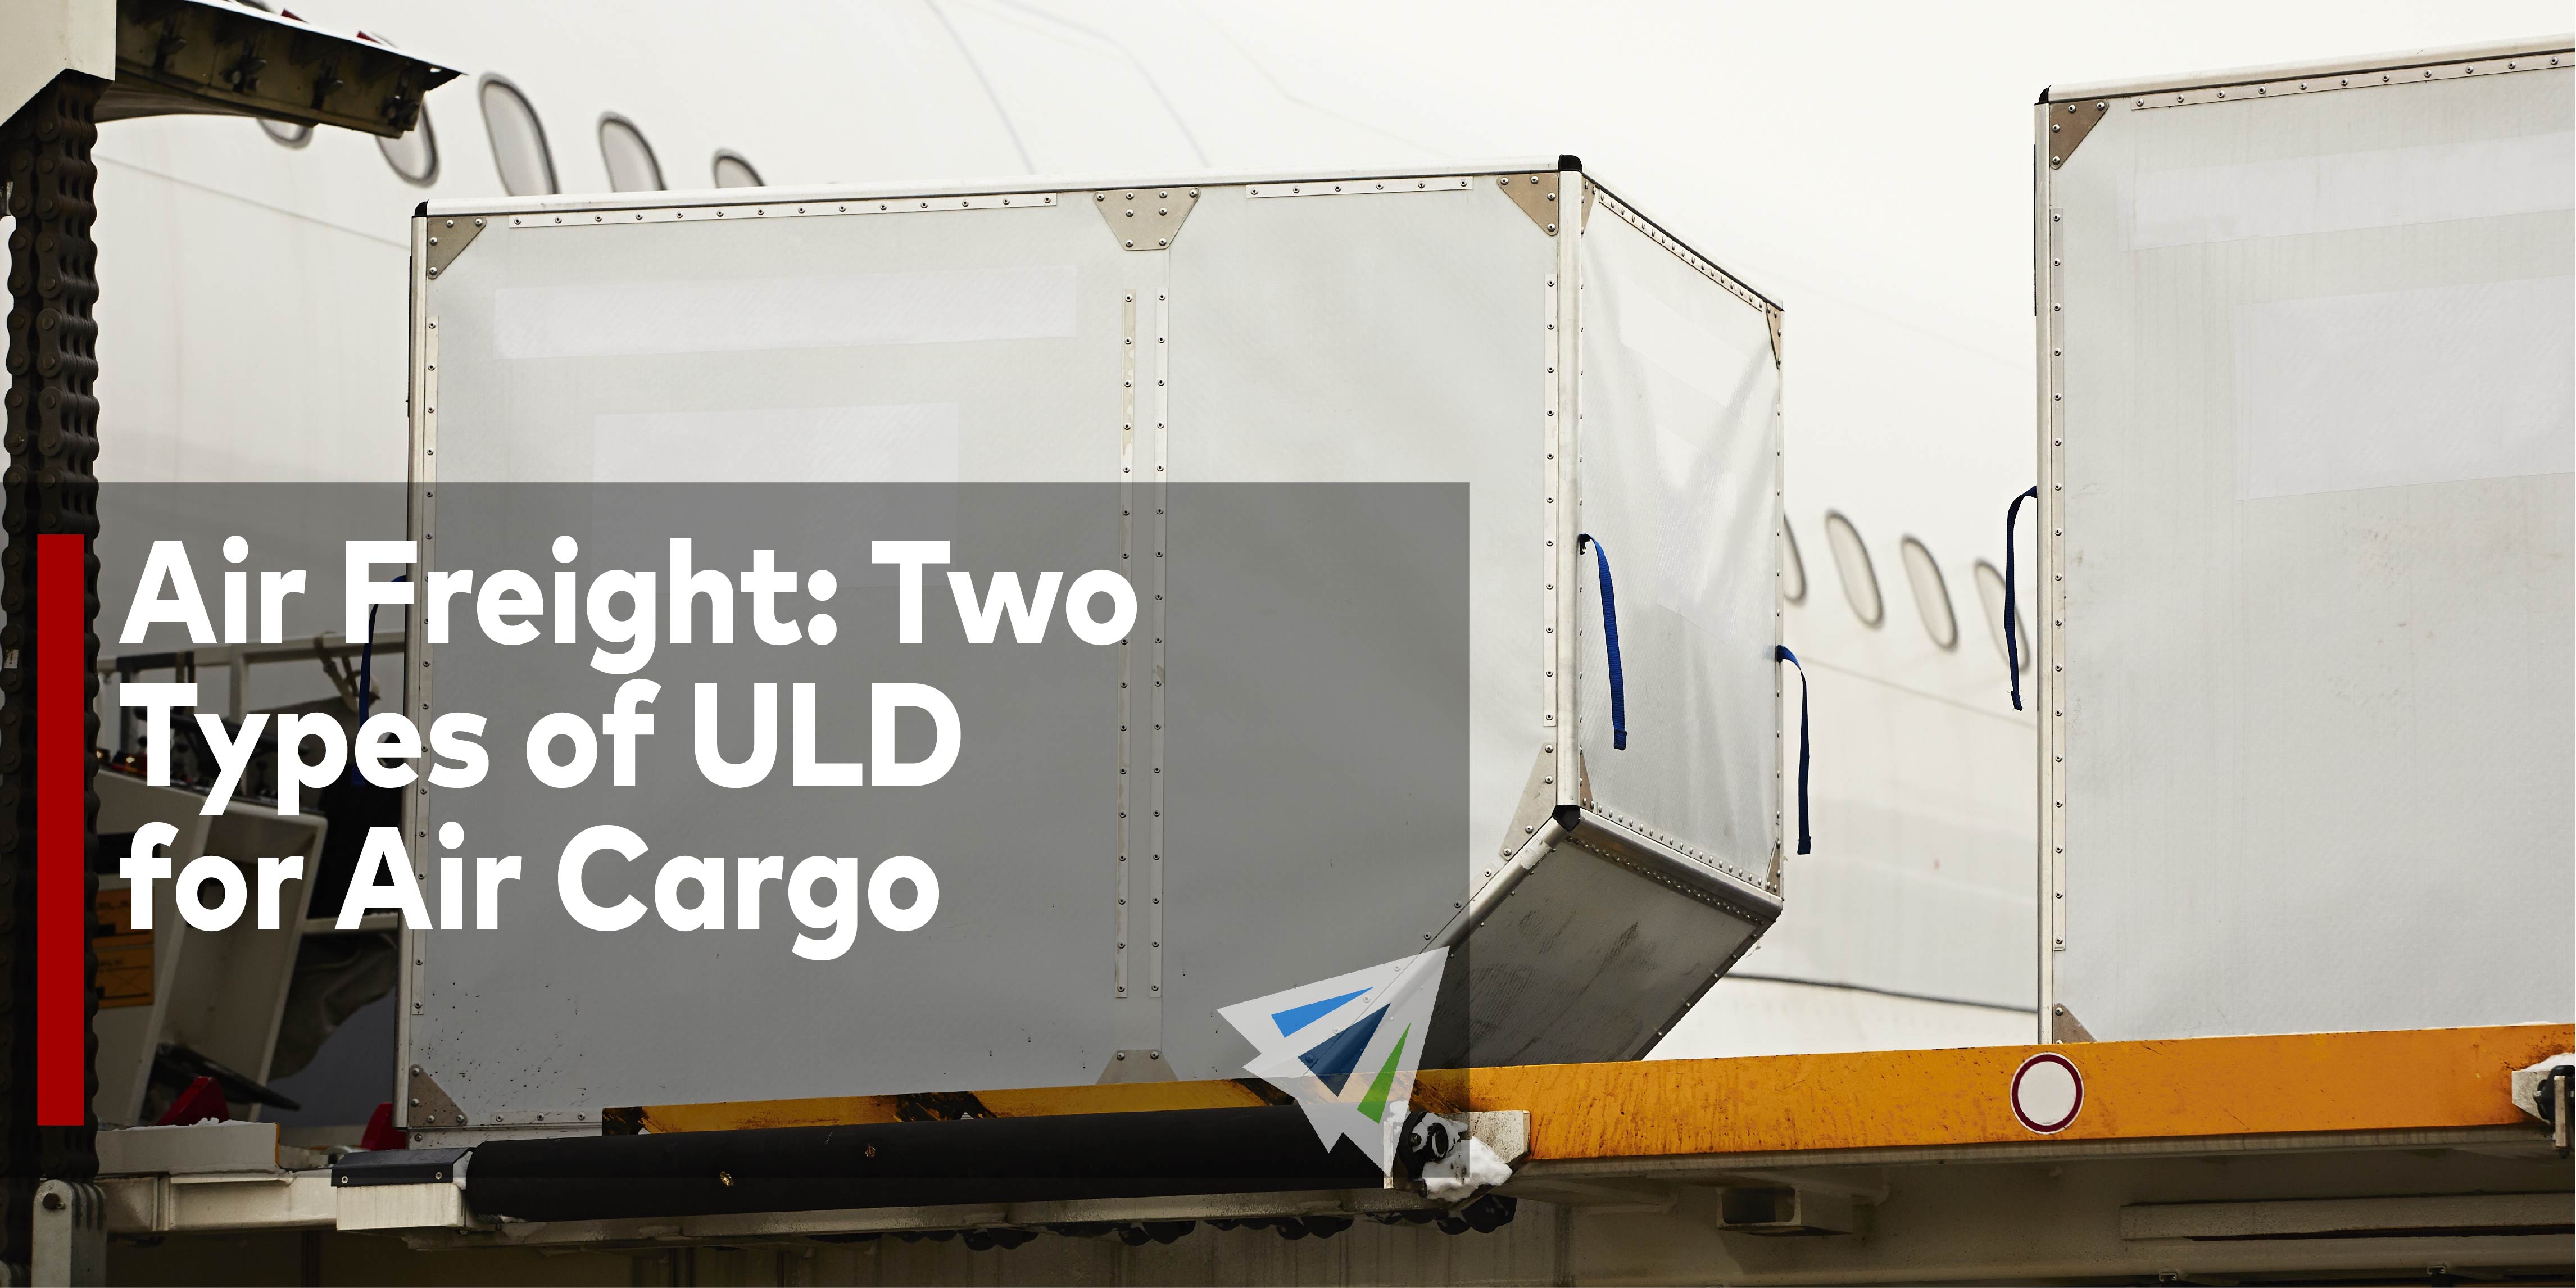 Air Freight: Two Types of ULD for Air Cargo